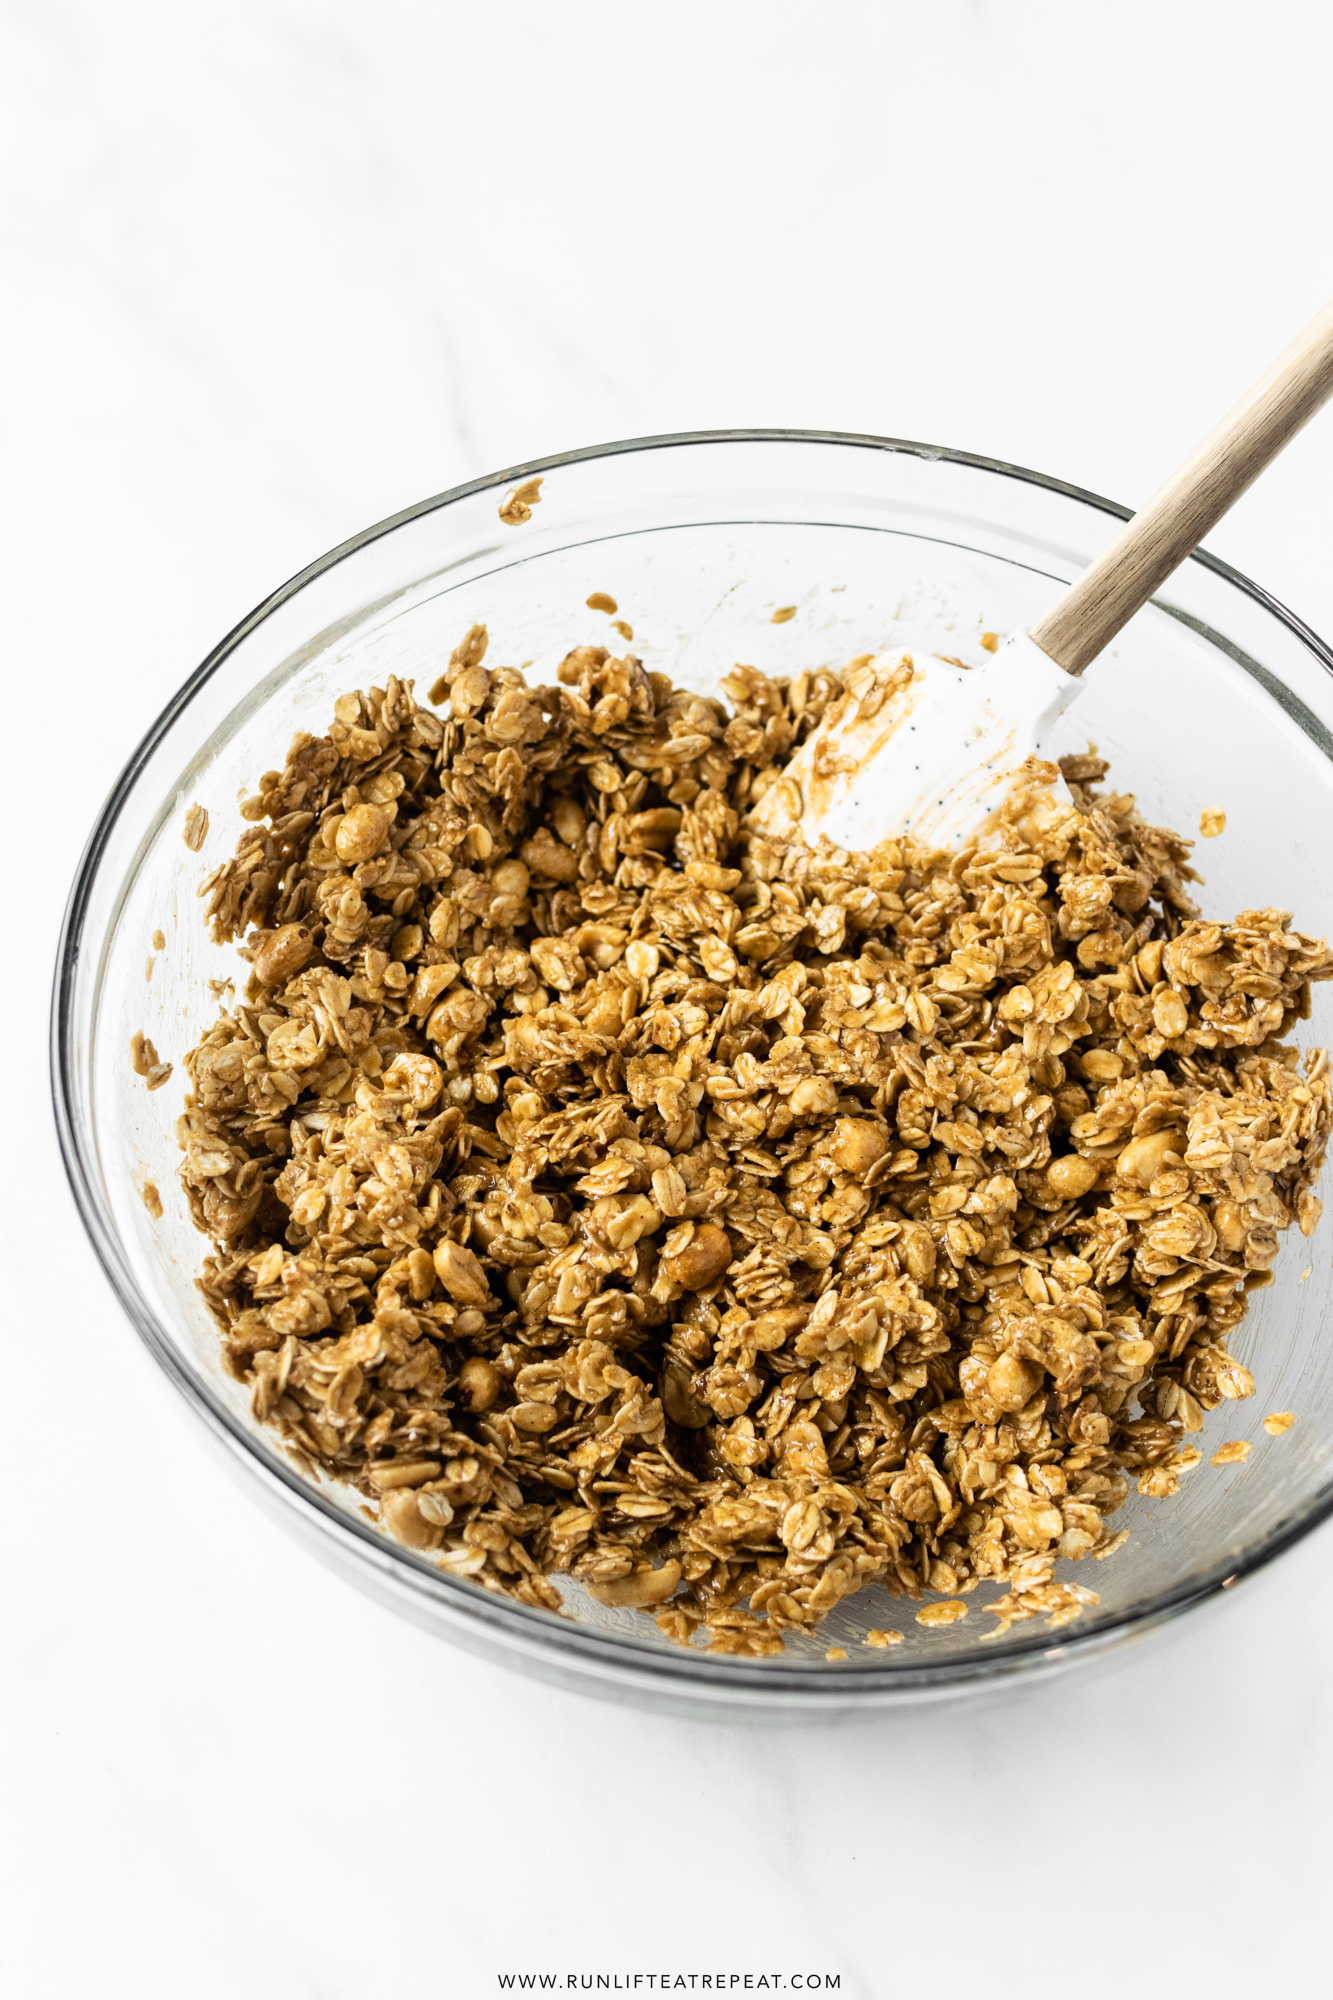 This homemade peanut butter granola is satisfying and delicious. Made with basic pantry ingredients— oats, cinnamon, coconut oil, honey, and maple syrup. With tons of flavor in each bite, you'll keep coming back for more!